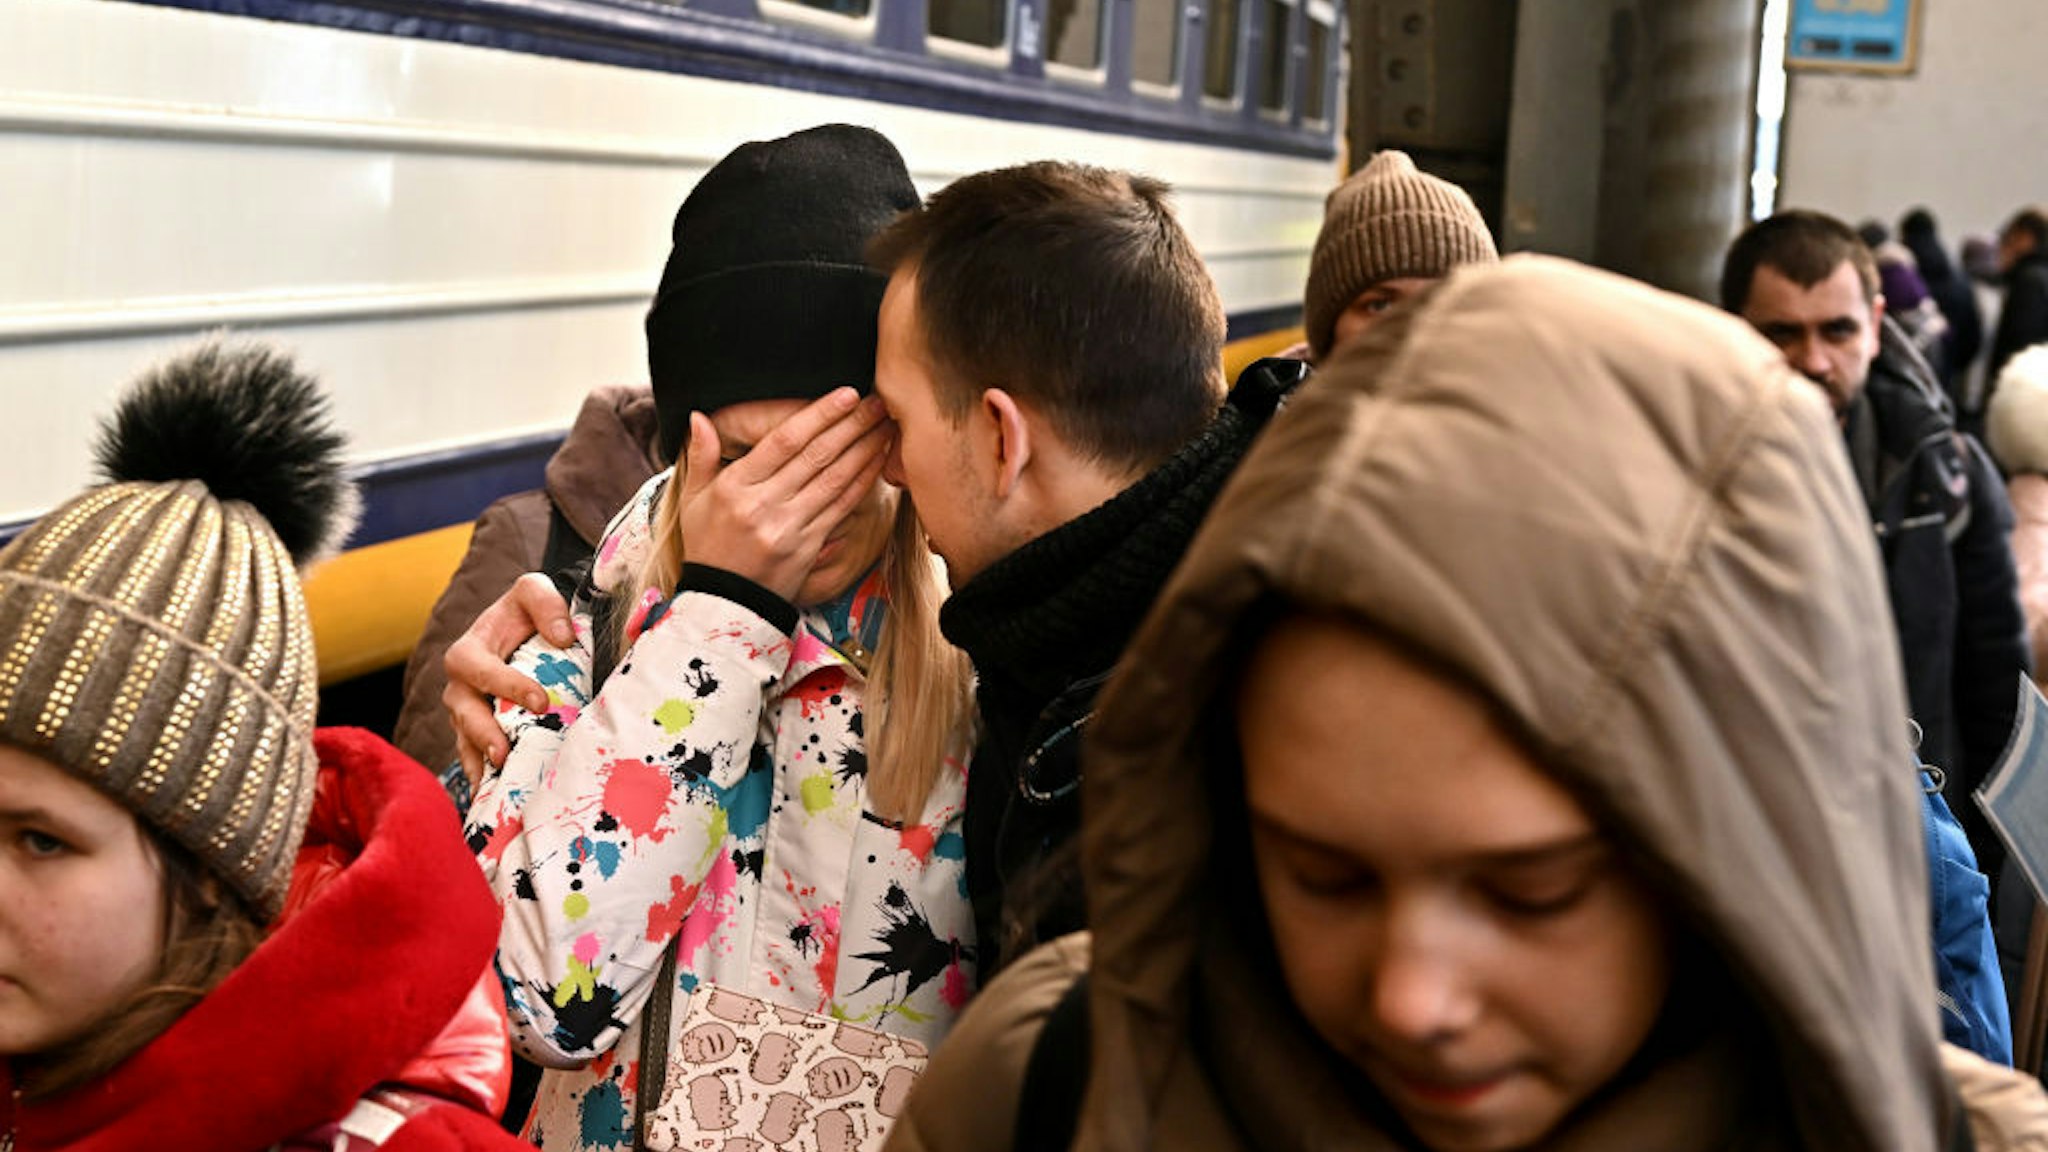 Lviv, Ukraine March 19, 2022: A man comforts his wife in Lviv, Ukraine before she boards a train to Przemysl, Poland. Over two million refugees have fled there towns after the Russians invaded. (Wally Skalij/Los Angeles Times via Getty Images)